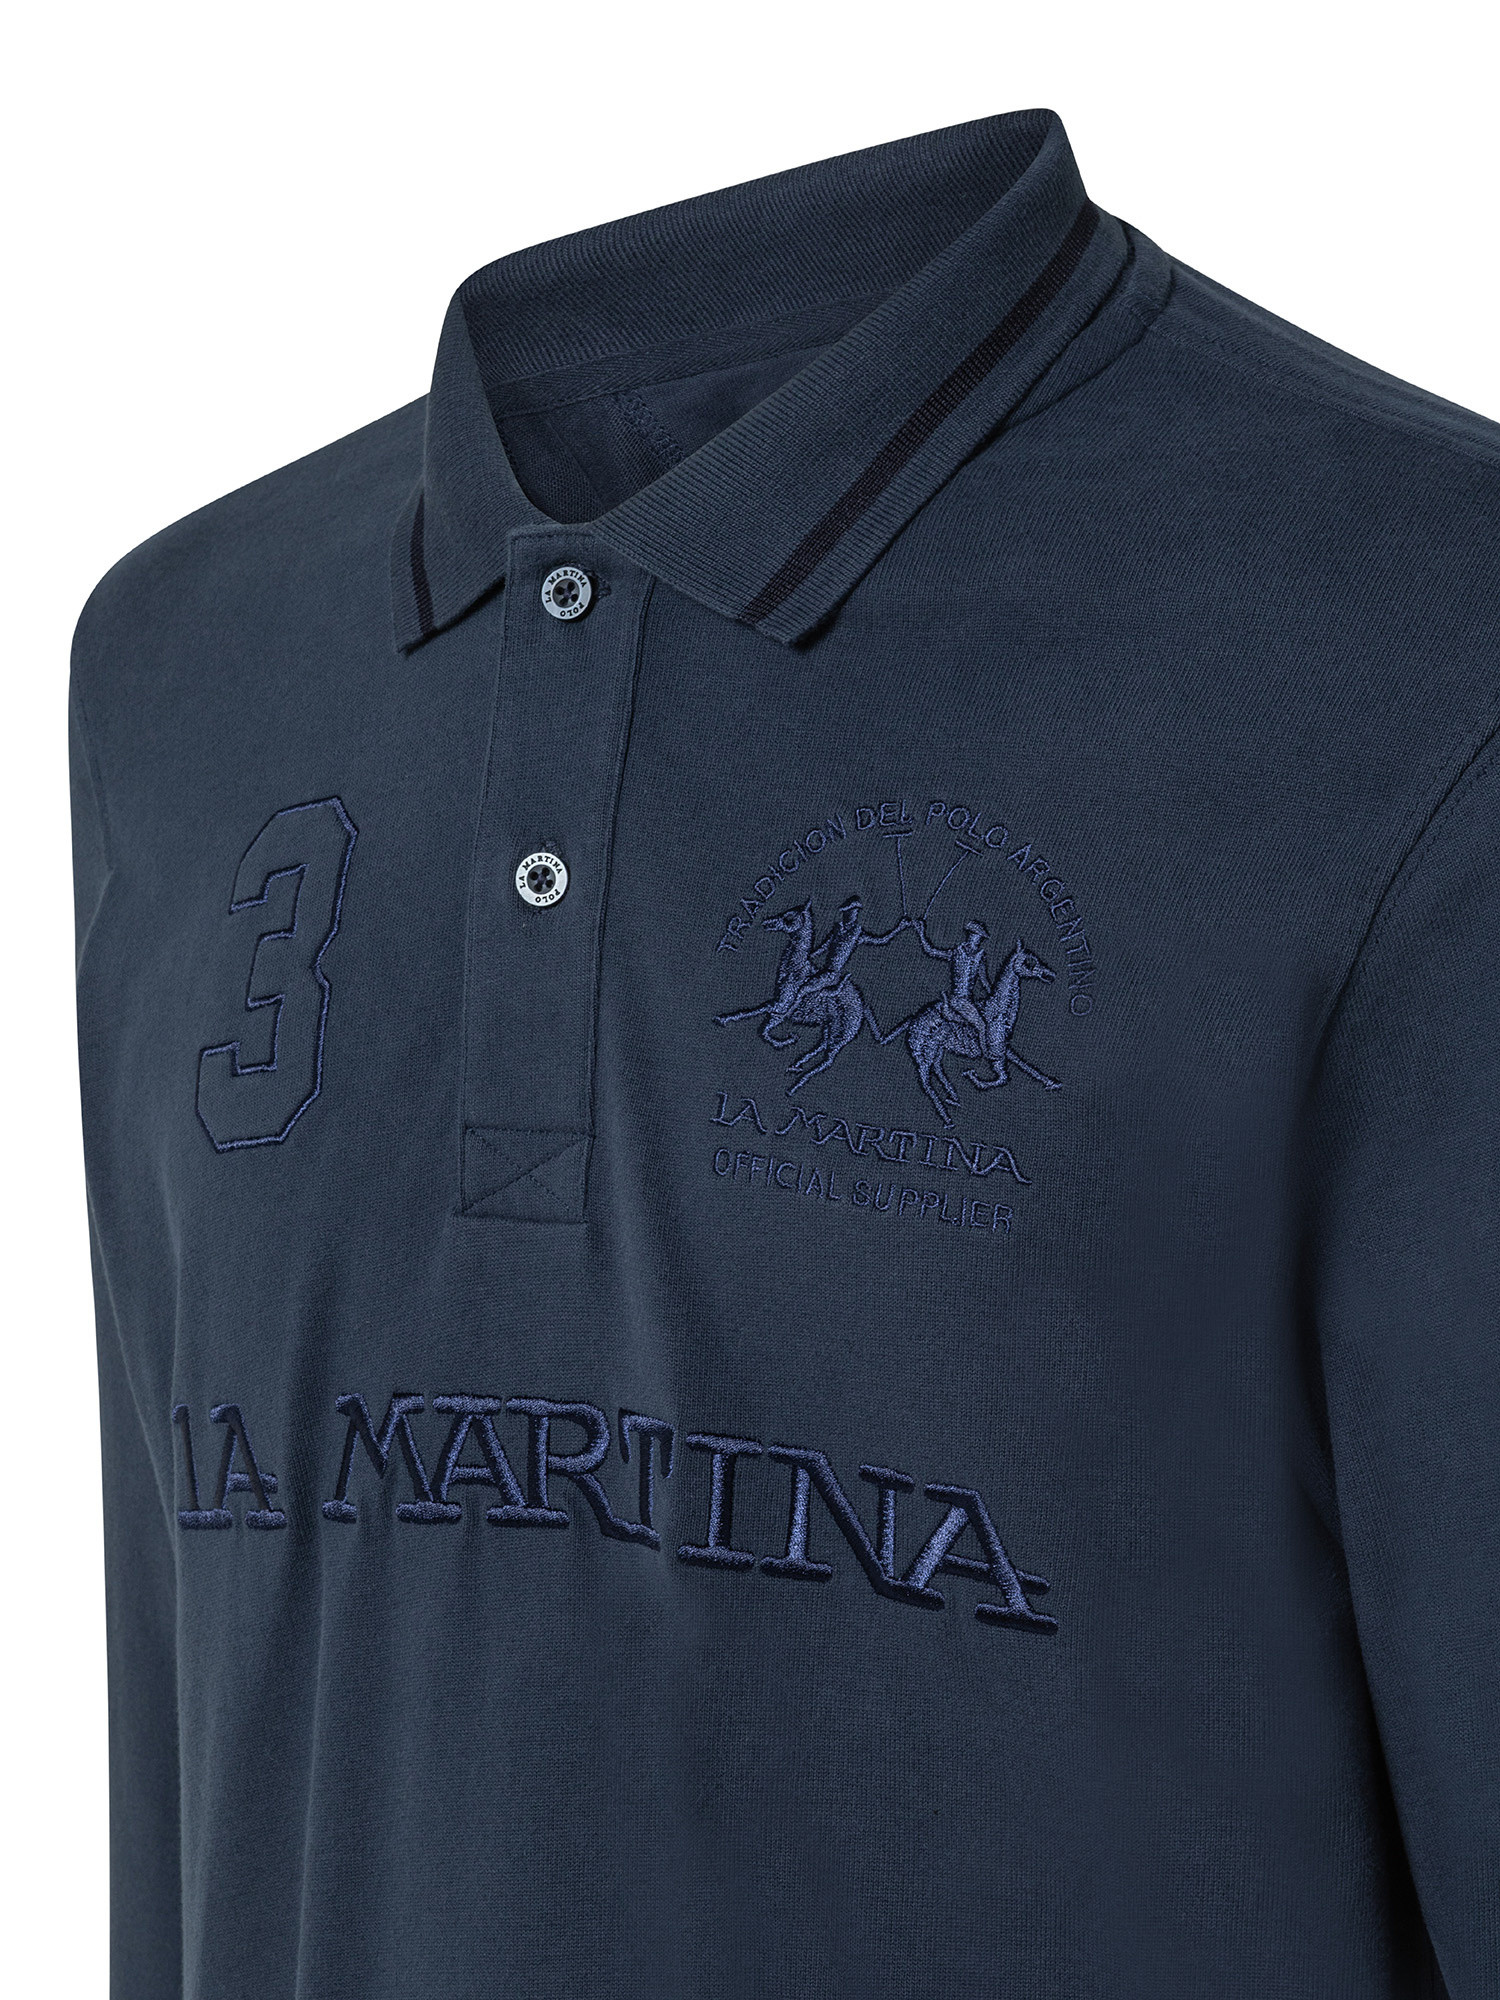 Regular fit long-sleeved polo shirt in pure cotton, Dark Blue, large image number 2